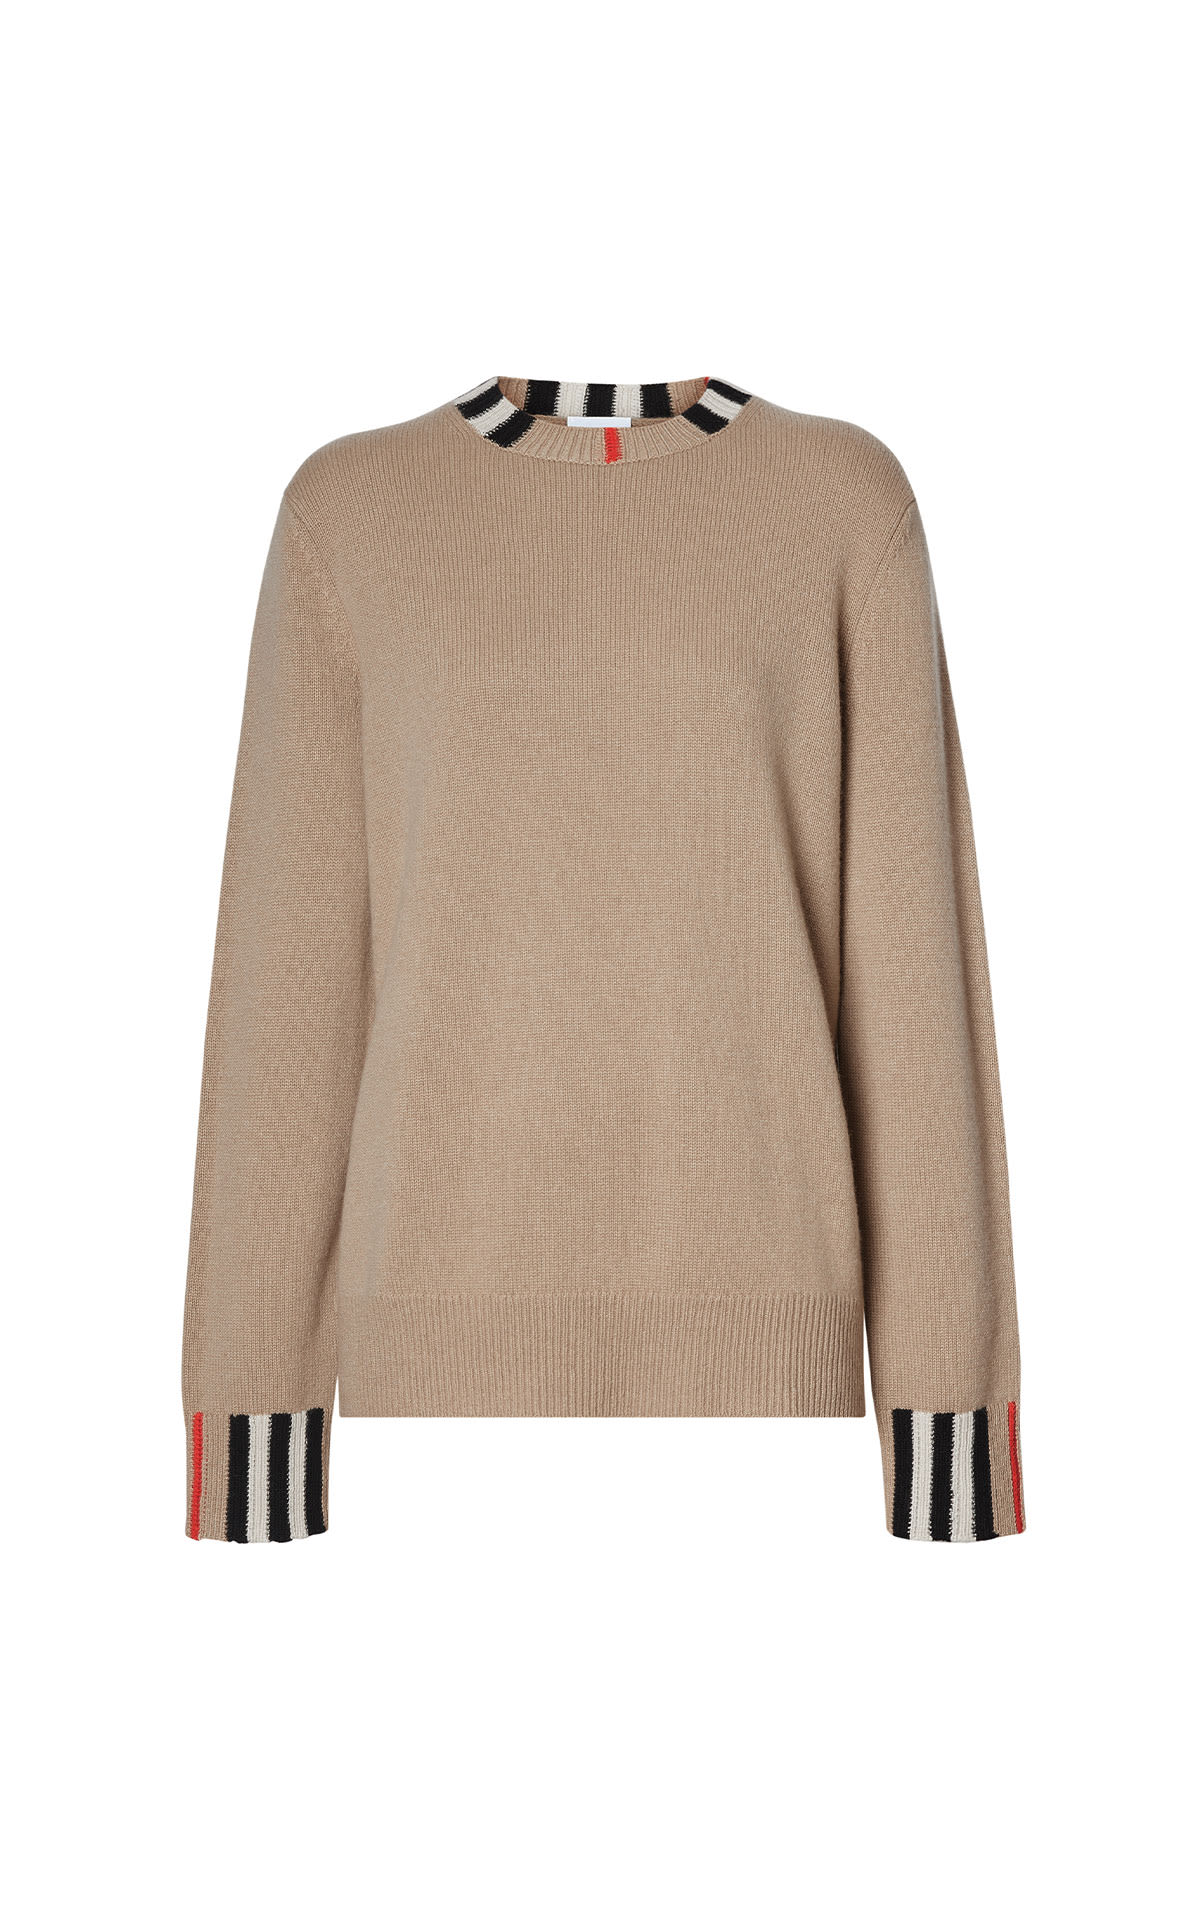 Burberry Icon stripe knit from Bicester Village